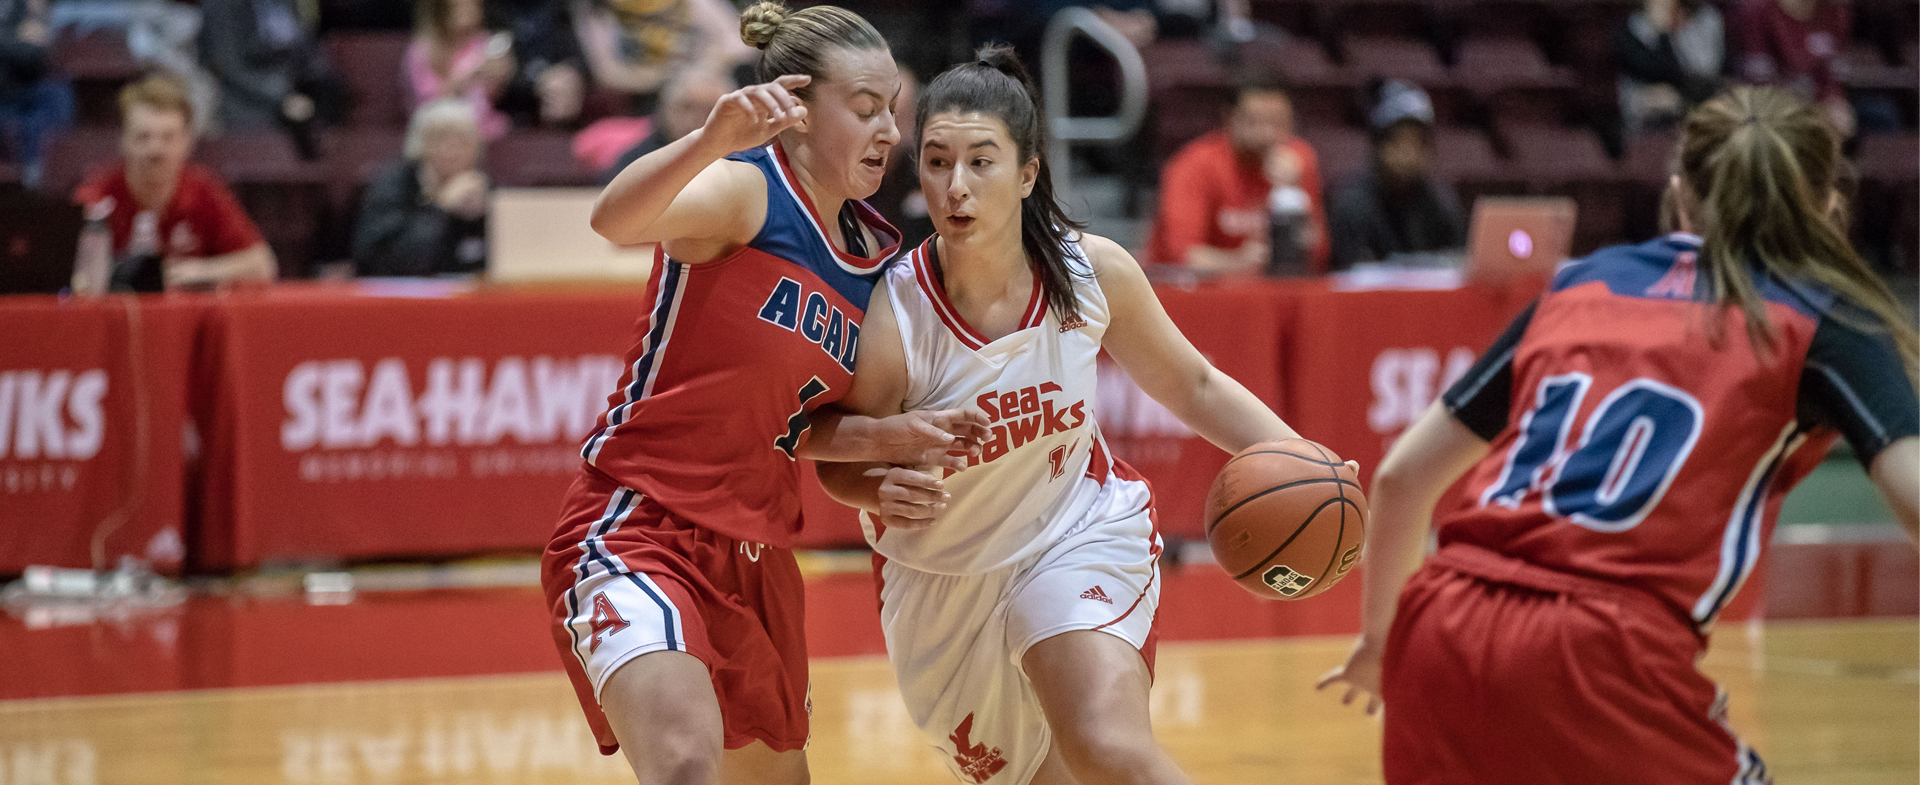 Sea-Hawks Host Reds At Home